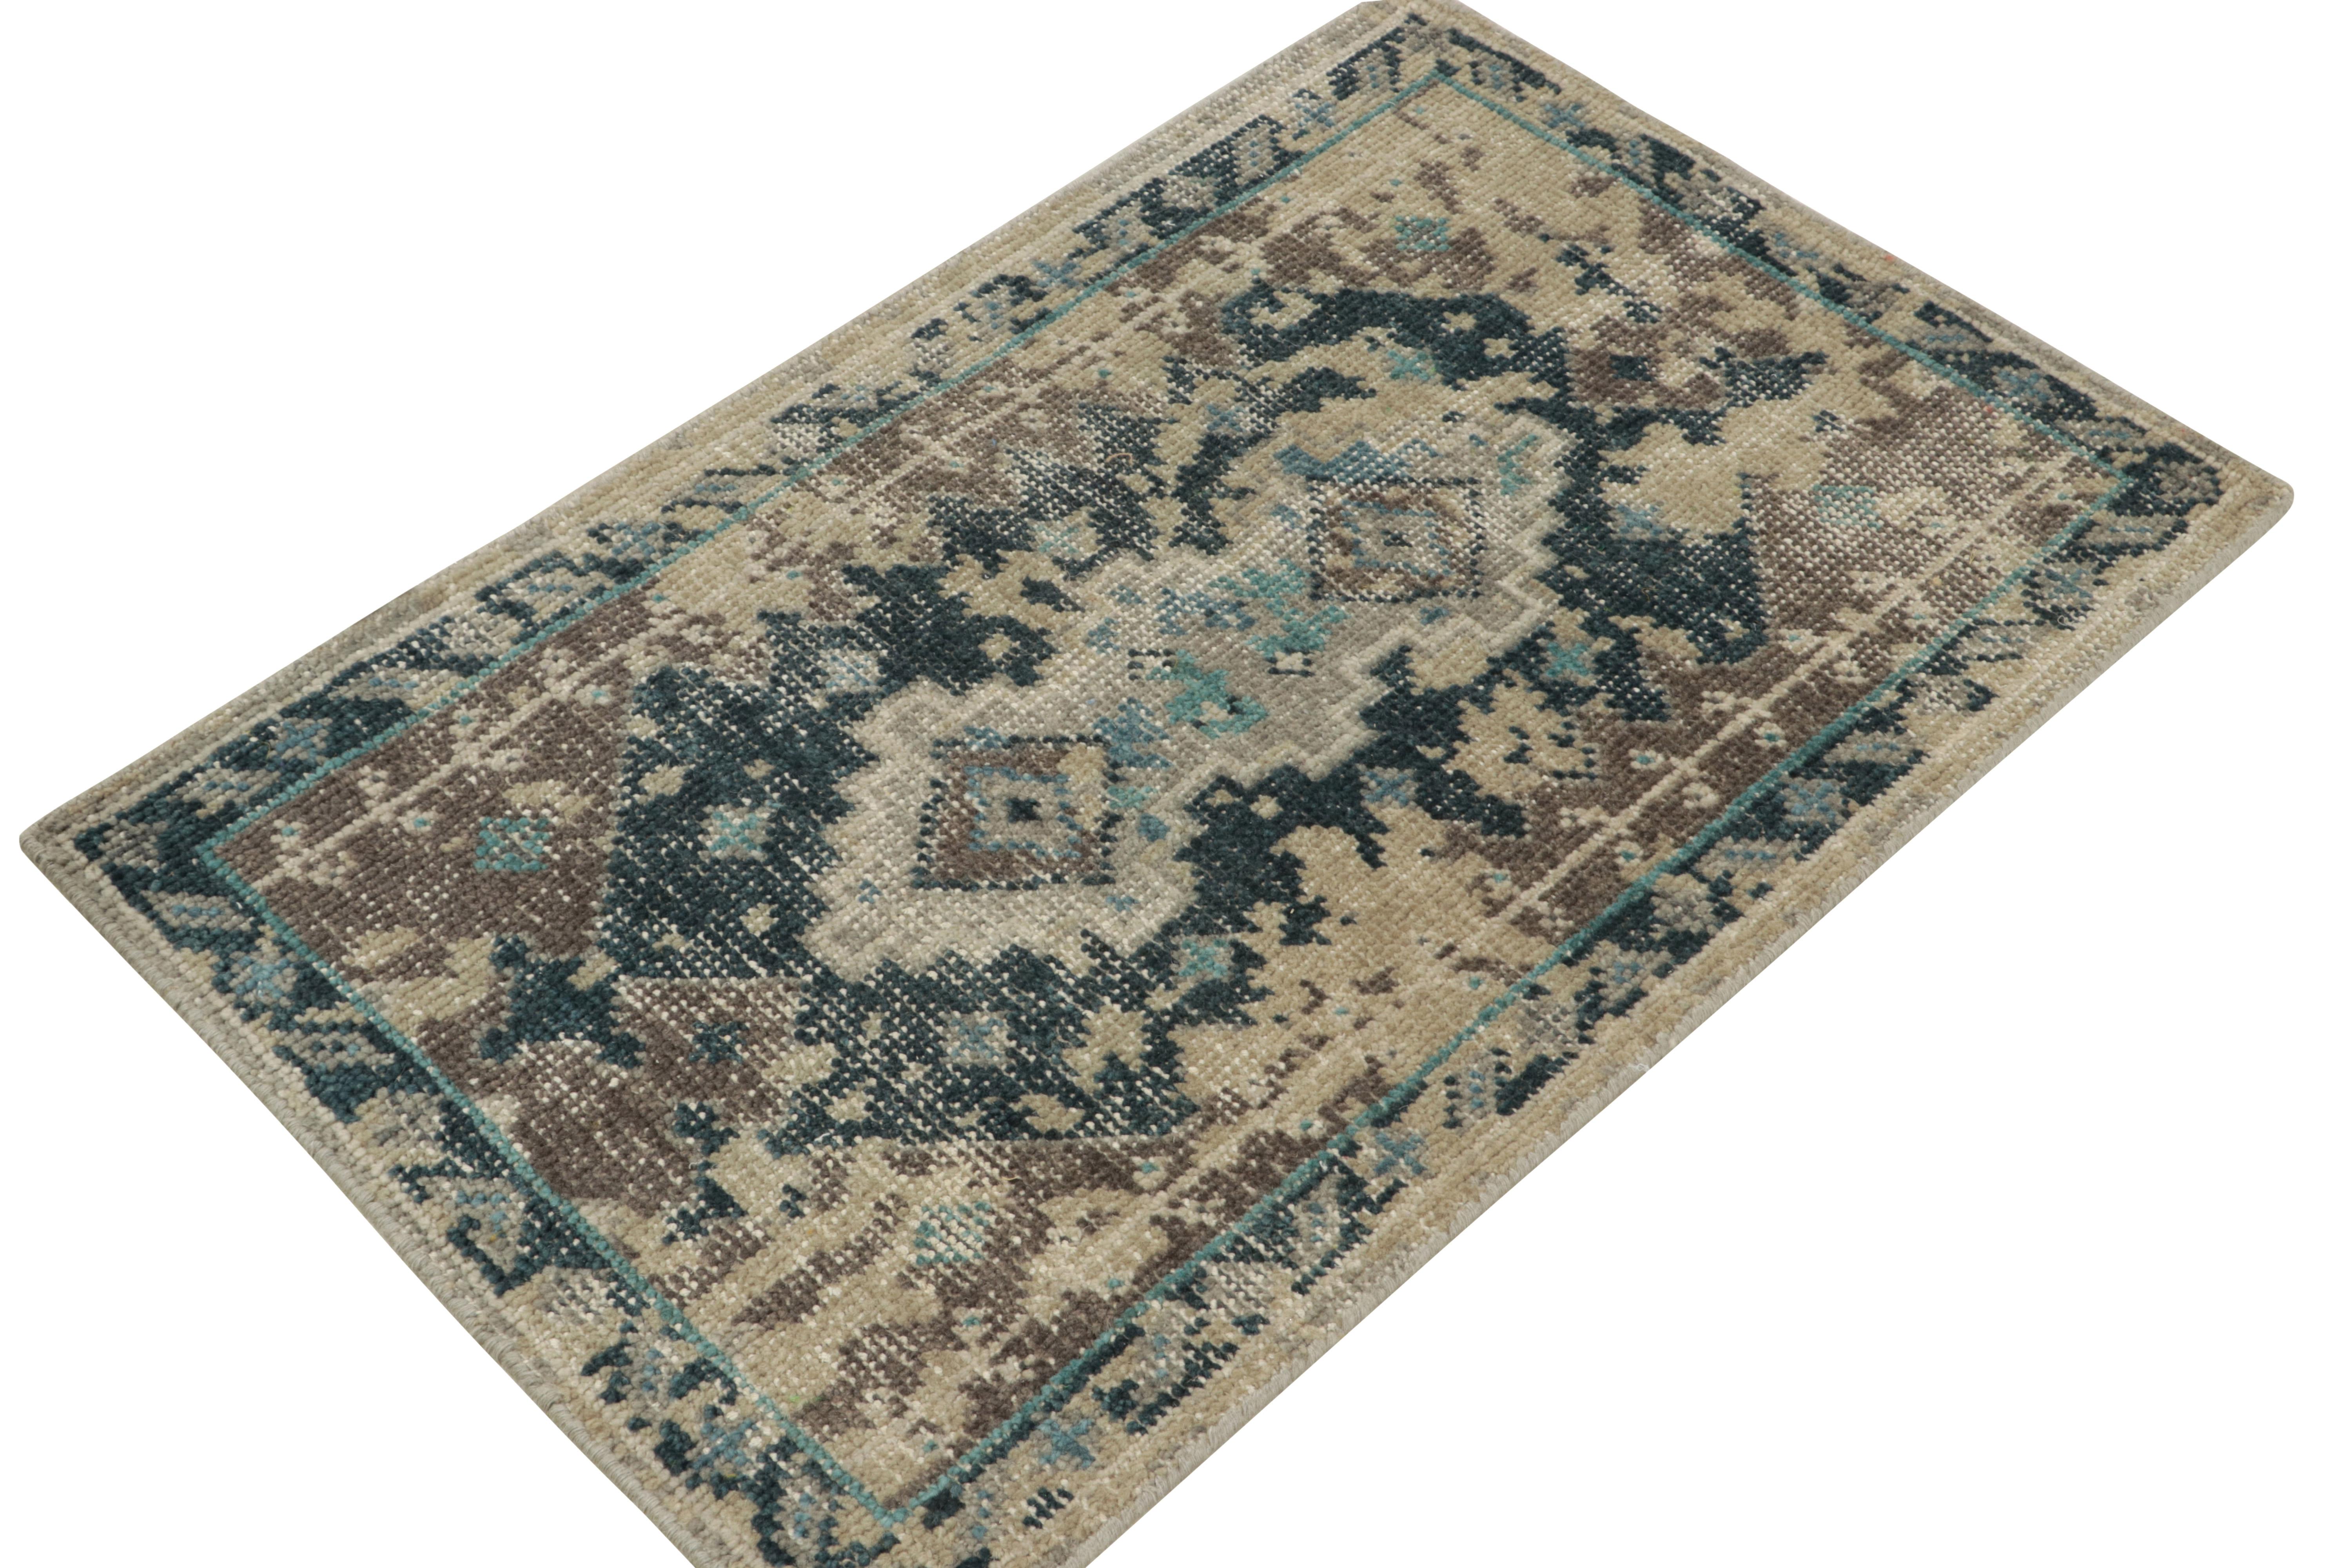 Indian Rug & Kilim's Distressed Style Scatter Rug in Blue, Beige-Brown Pattern For Sale